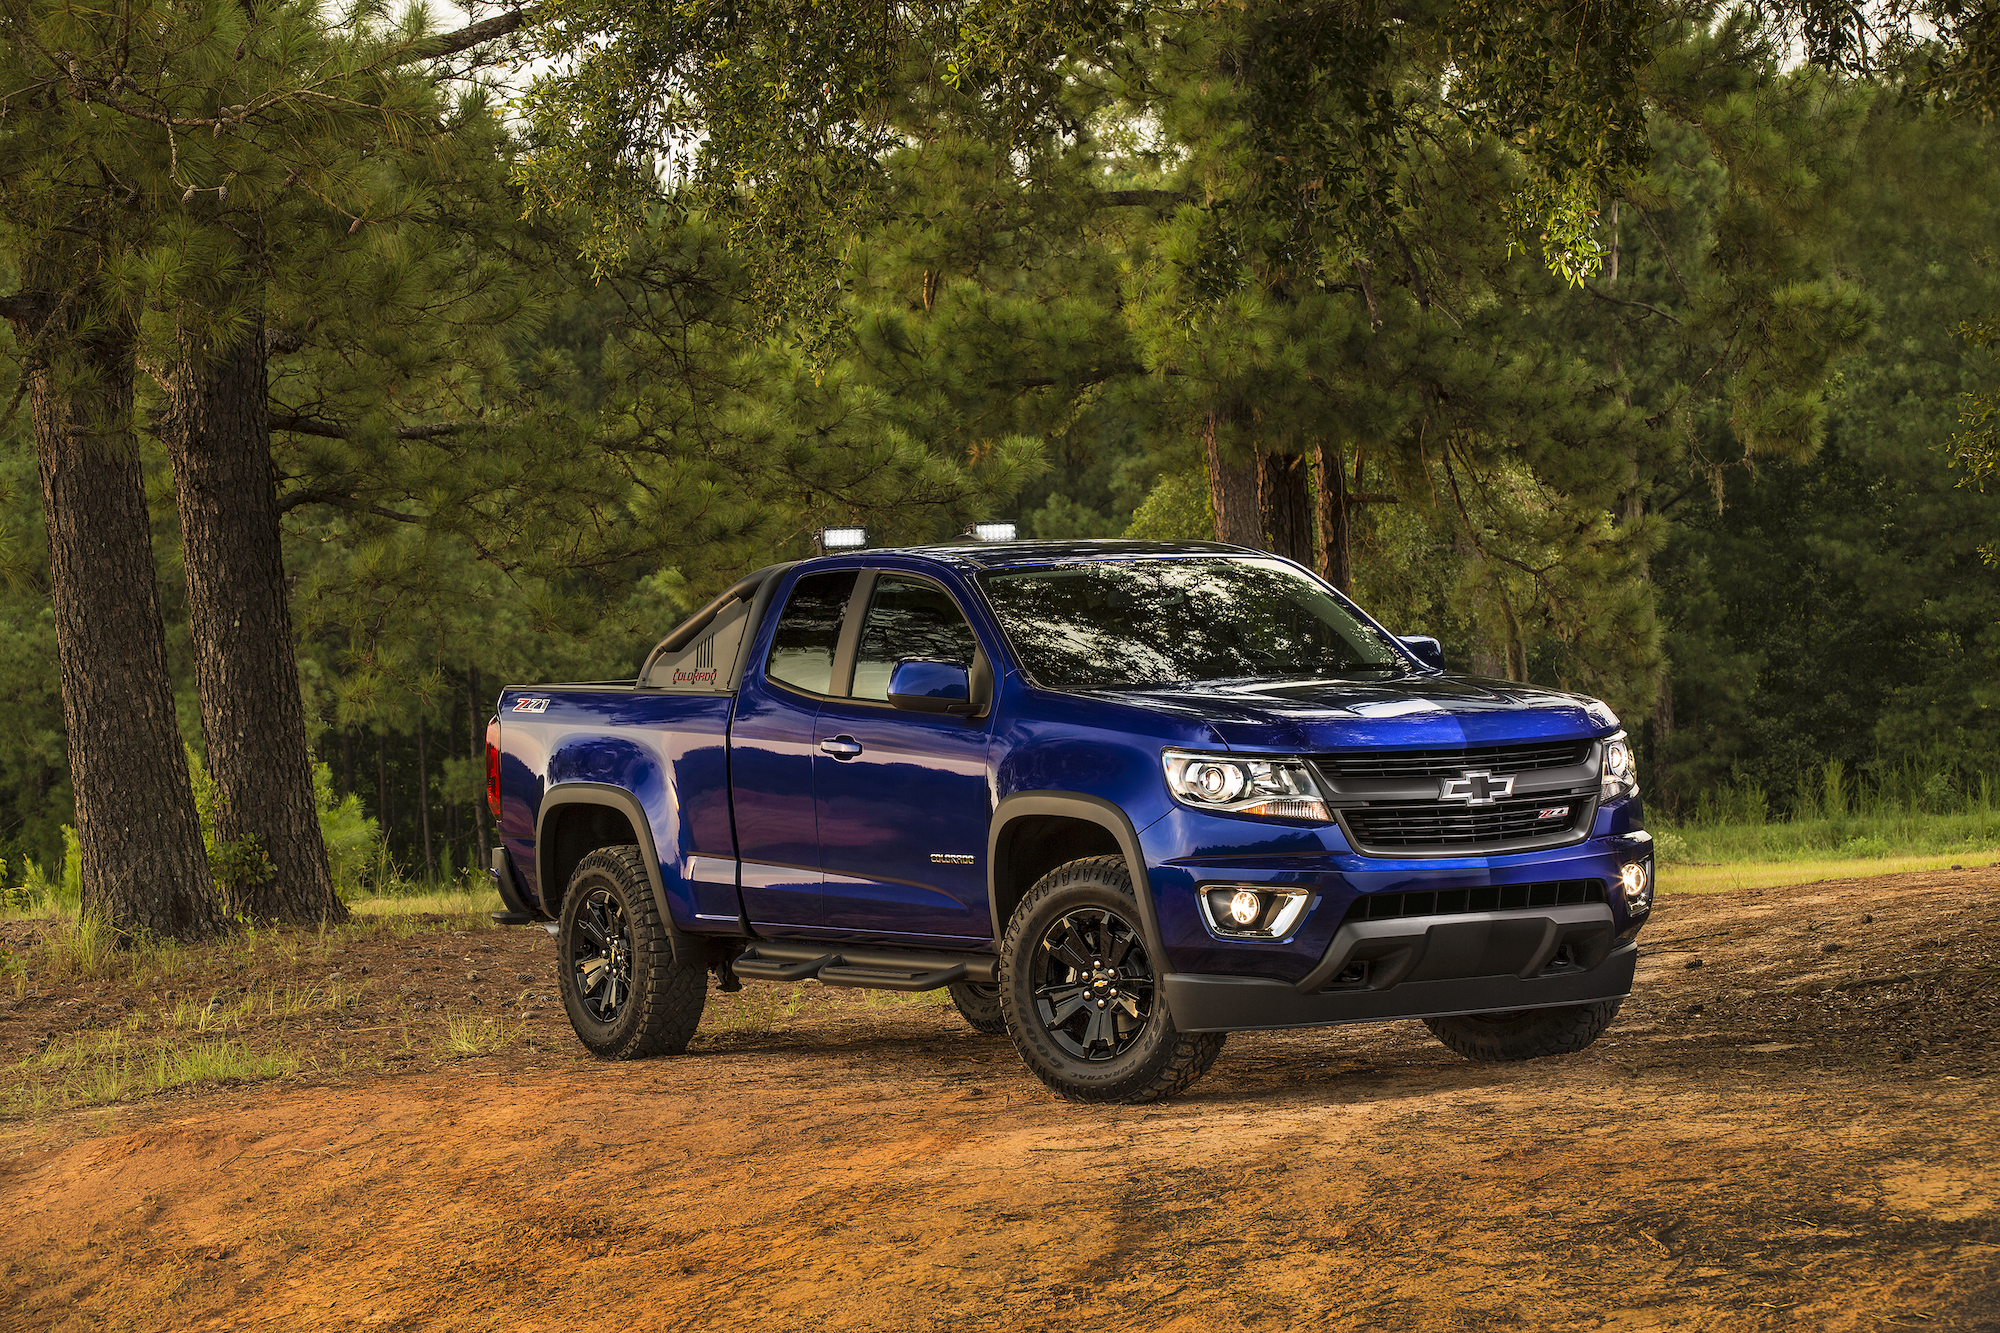 A dark-blue 2016 Chevy Colorado Trail Boss parked on red soil in front of shrubbery and trees